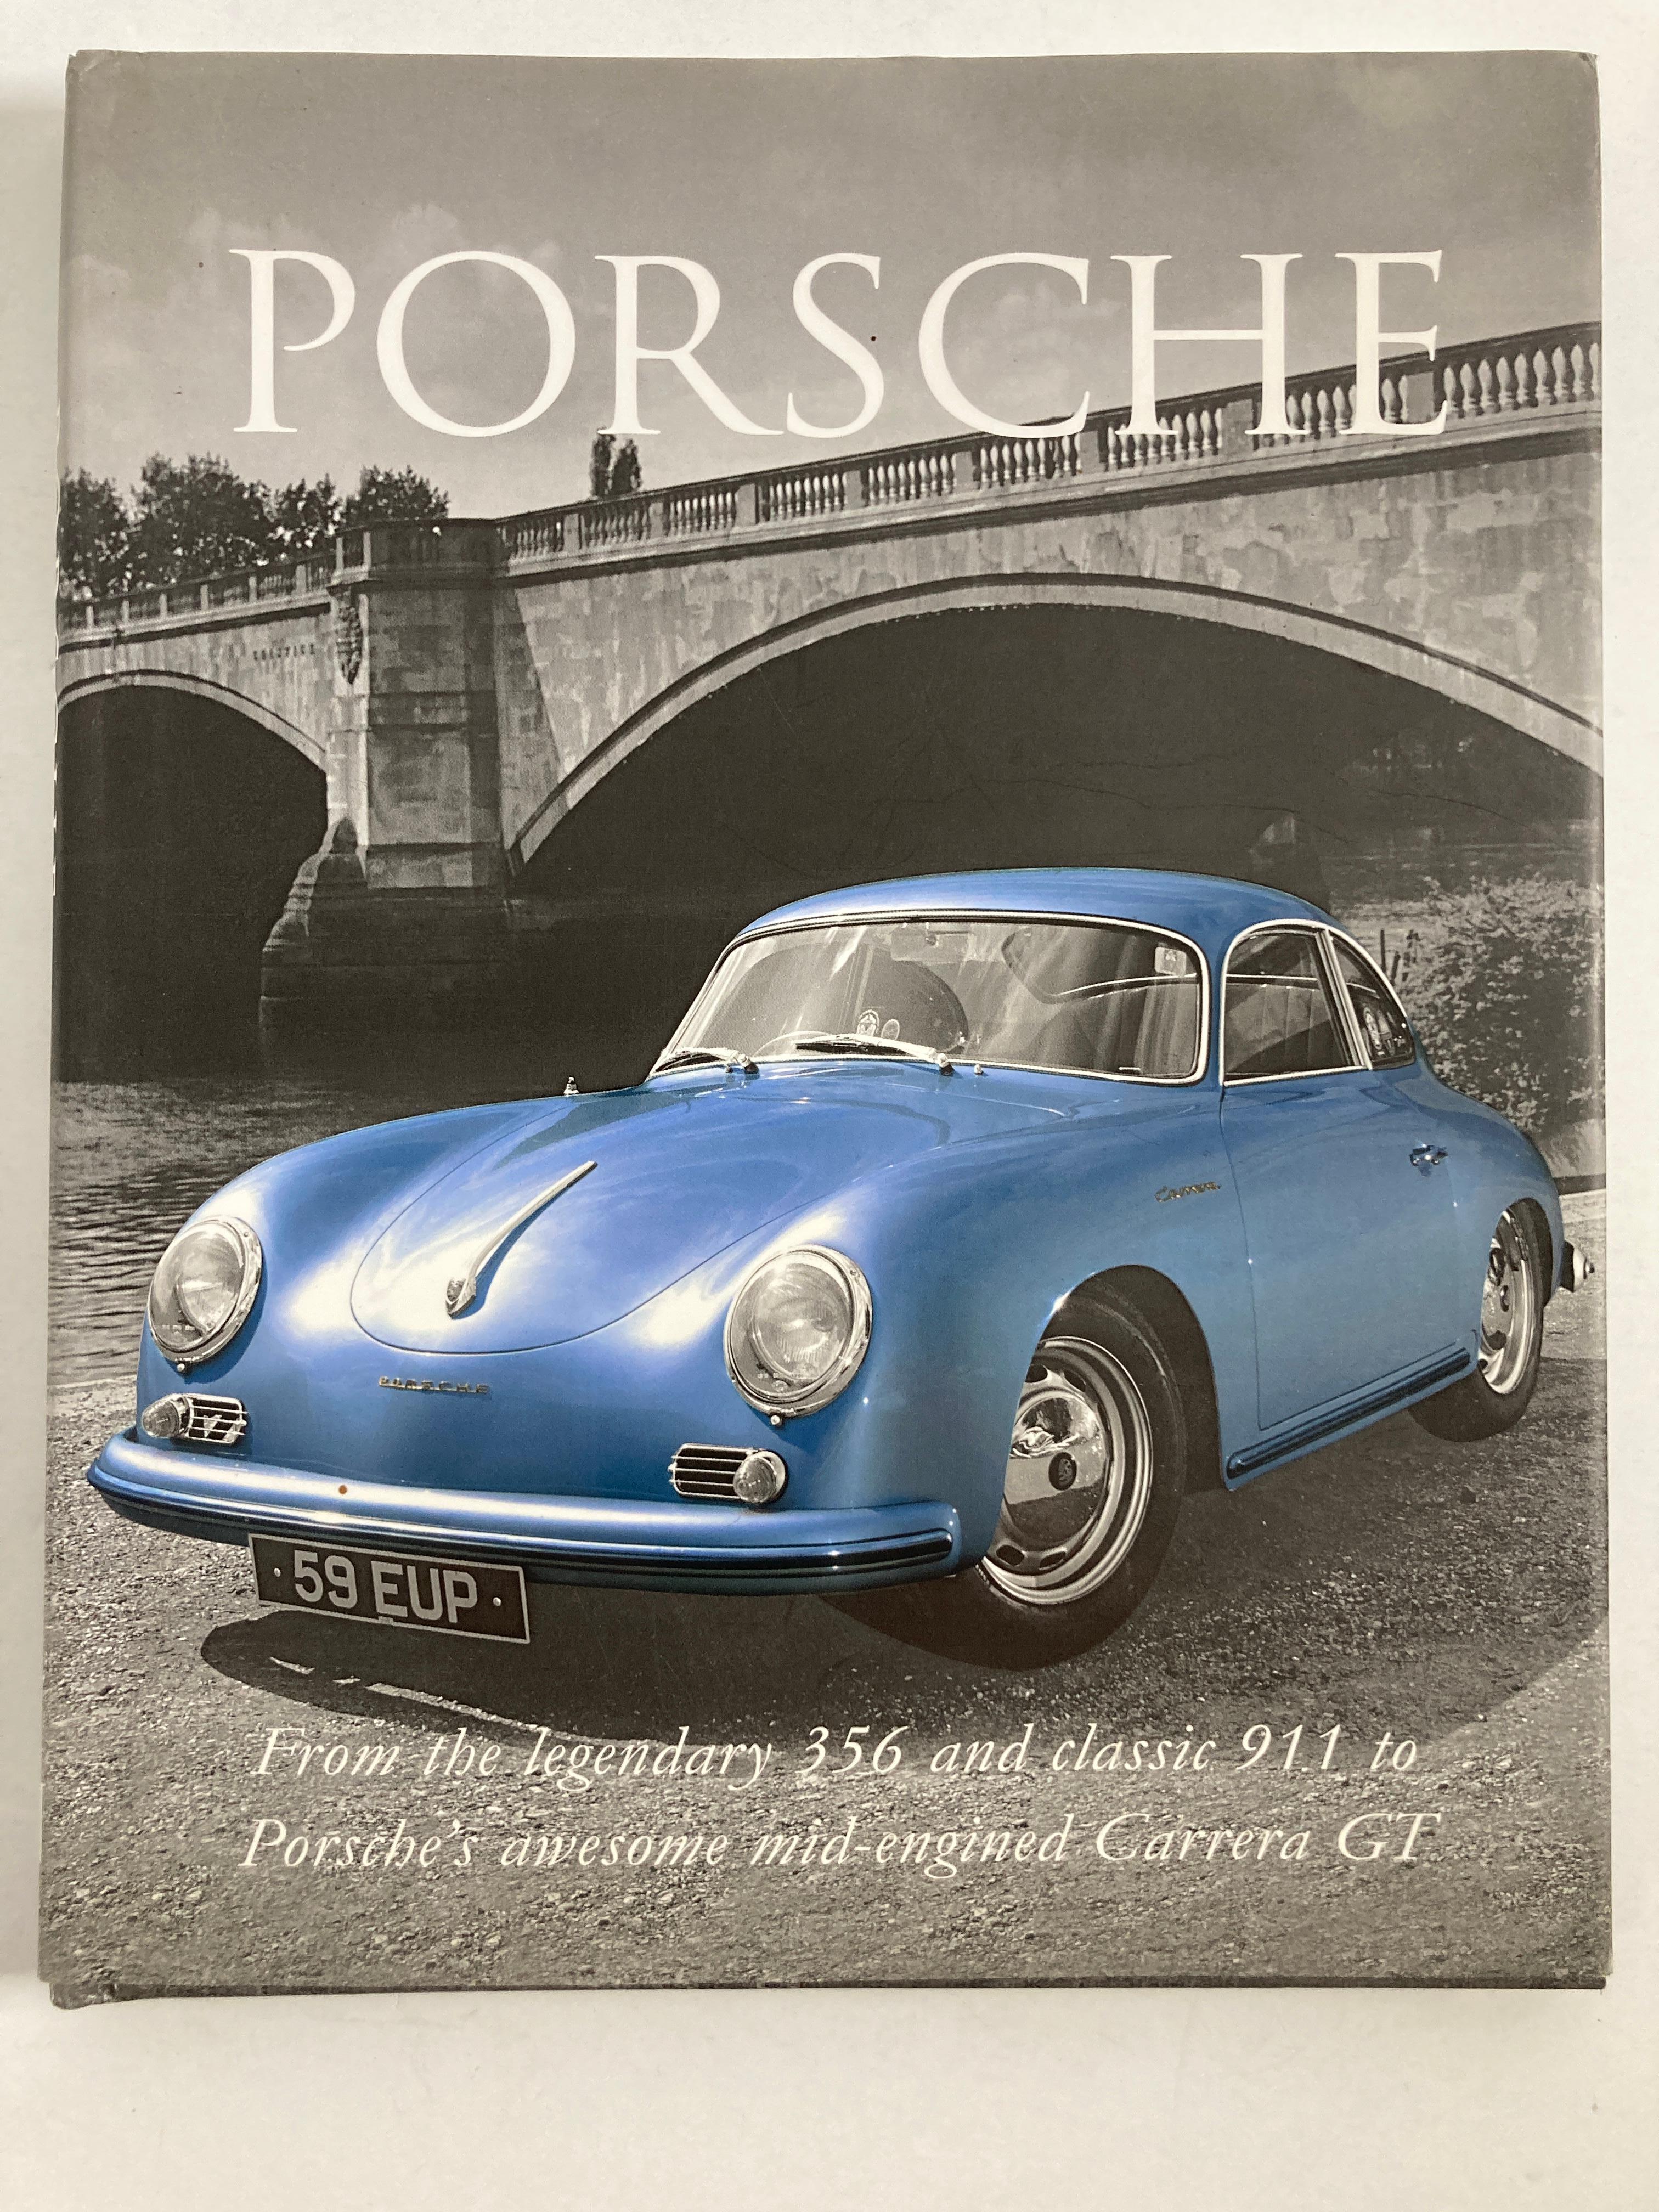 Porsche from the legendary 356 and classic 911 to Carrera GT book.
For Porsche lovers, this beautifully illustrated book depicts dozens of classic Porches from every era in full color, from the 356 of the 1950s to the latest Boxster and